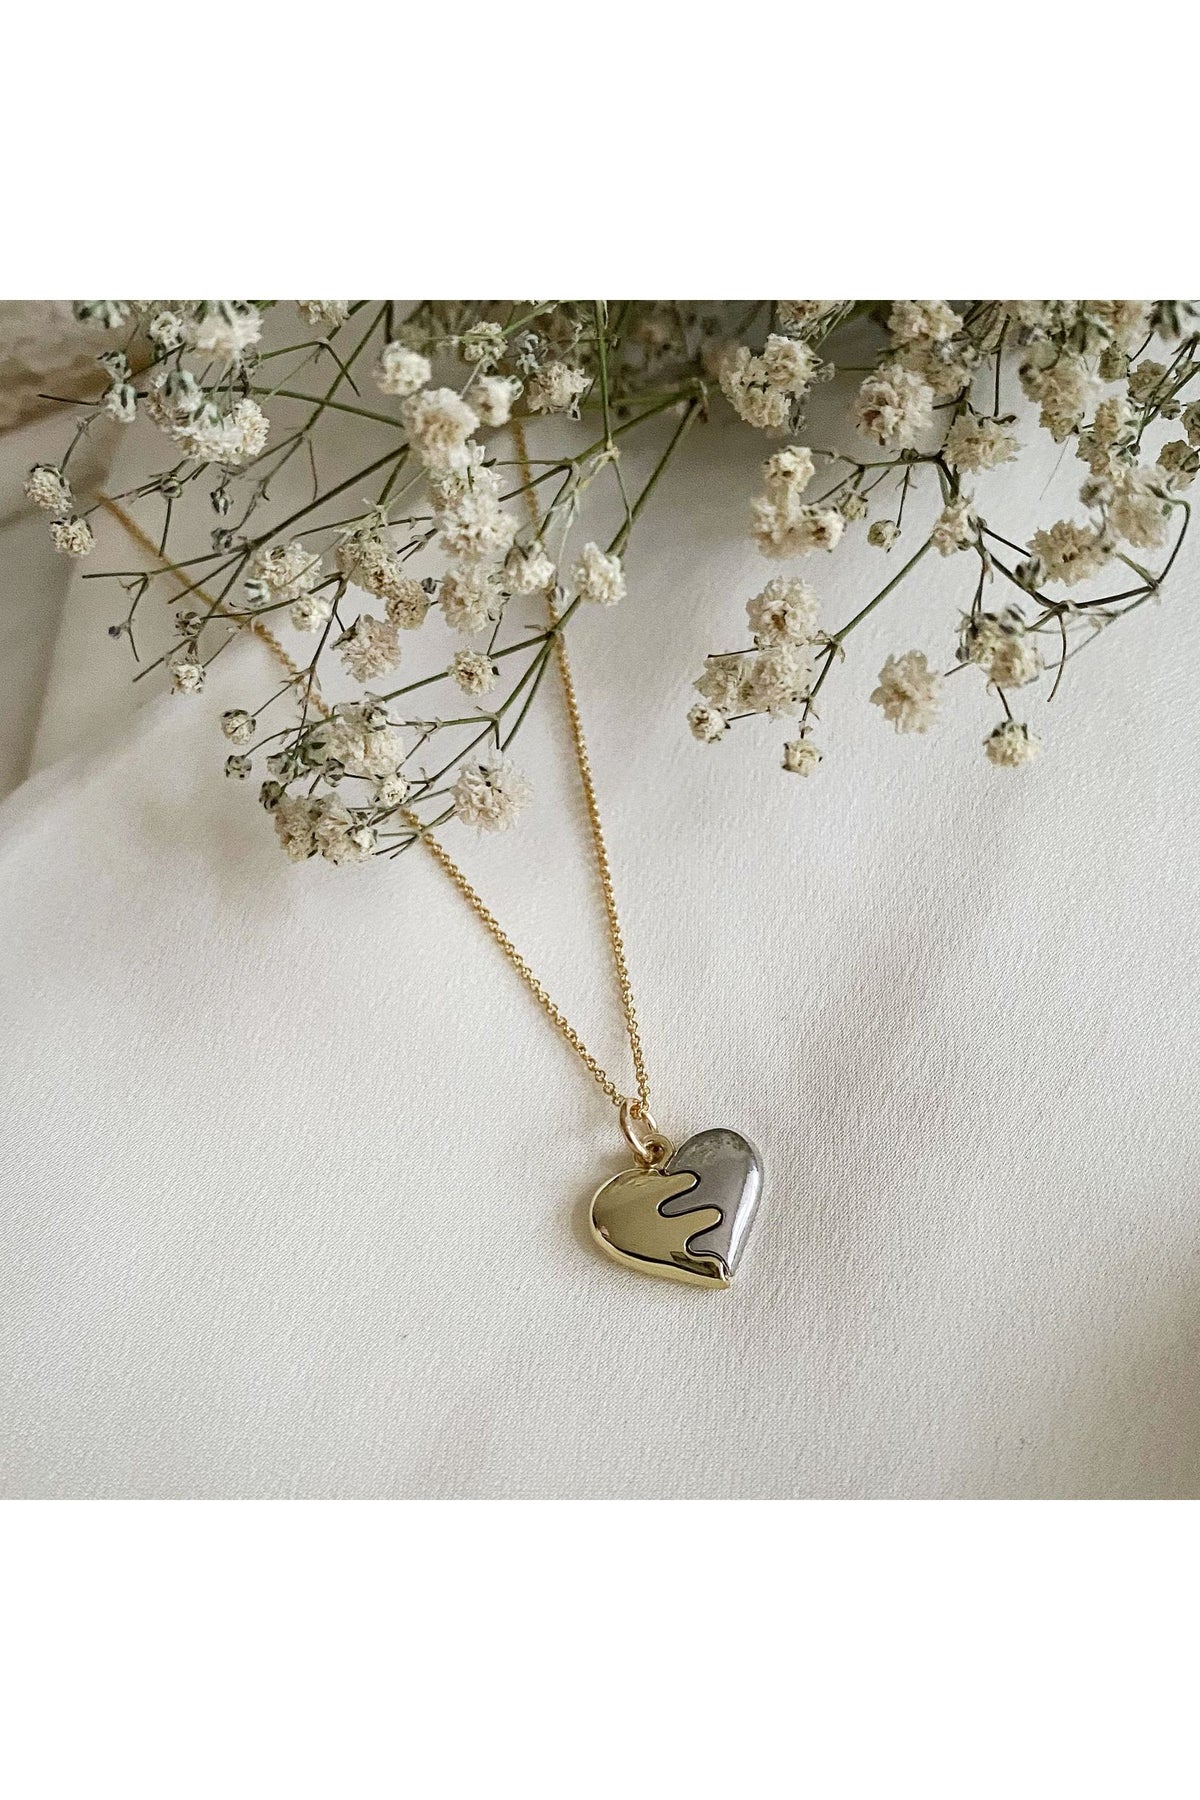 'Togetherness' Mixed Metal Heart Necklace togethernessnecklace